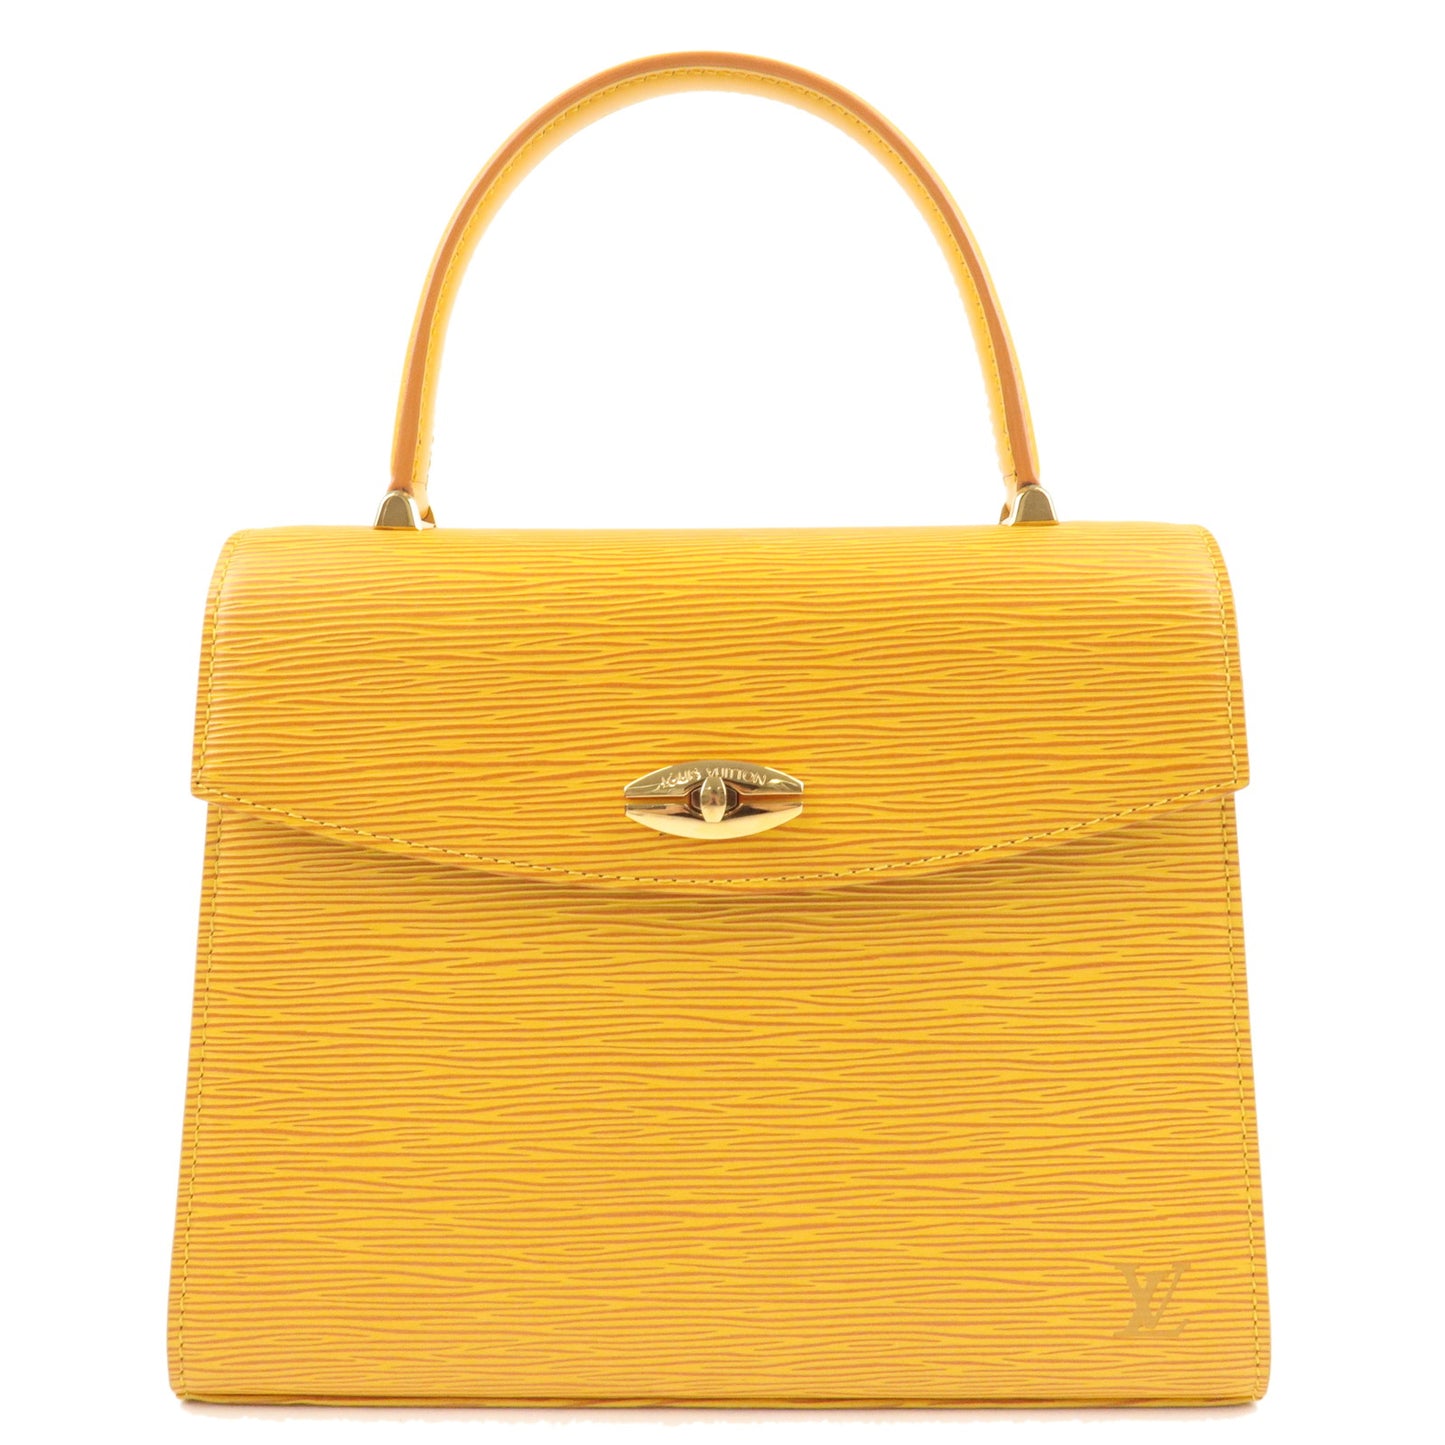 Buy Free Shipping Authentic Pre-owned Louis Vuitton Epi Tassili Yellow  Malesherbes Handbag Purse M52379 220136 from Japan - Buy authentic Plus  exclusive items from Japan